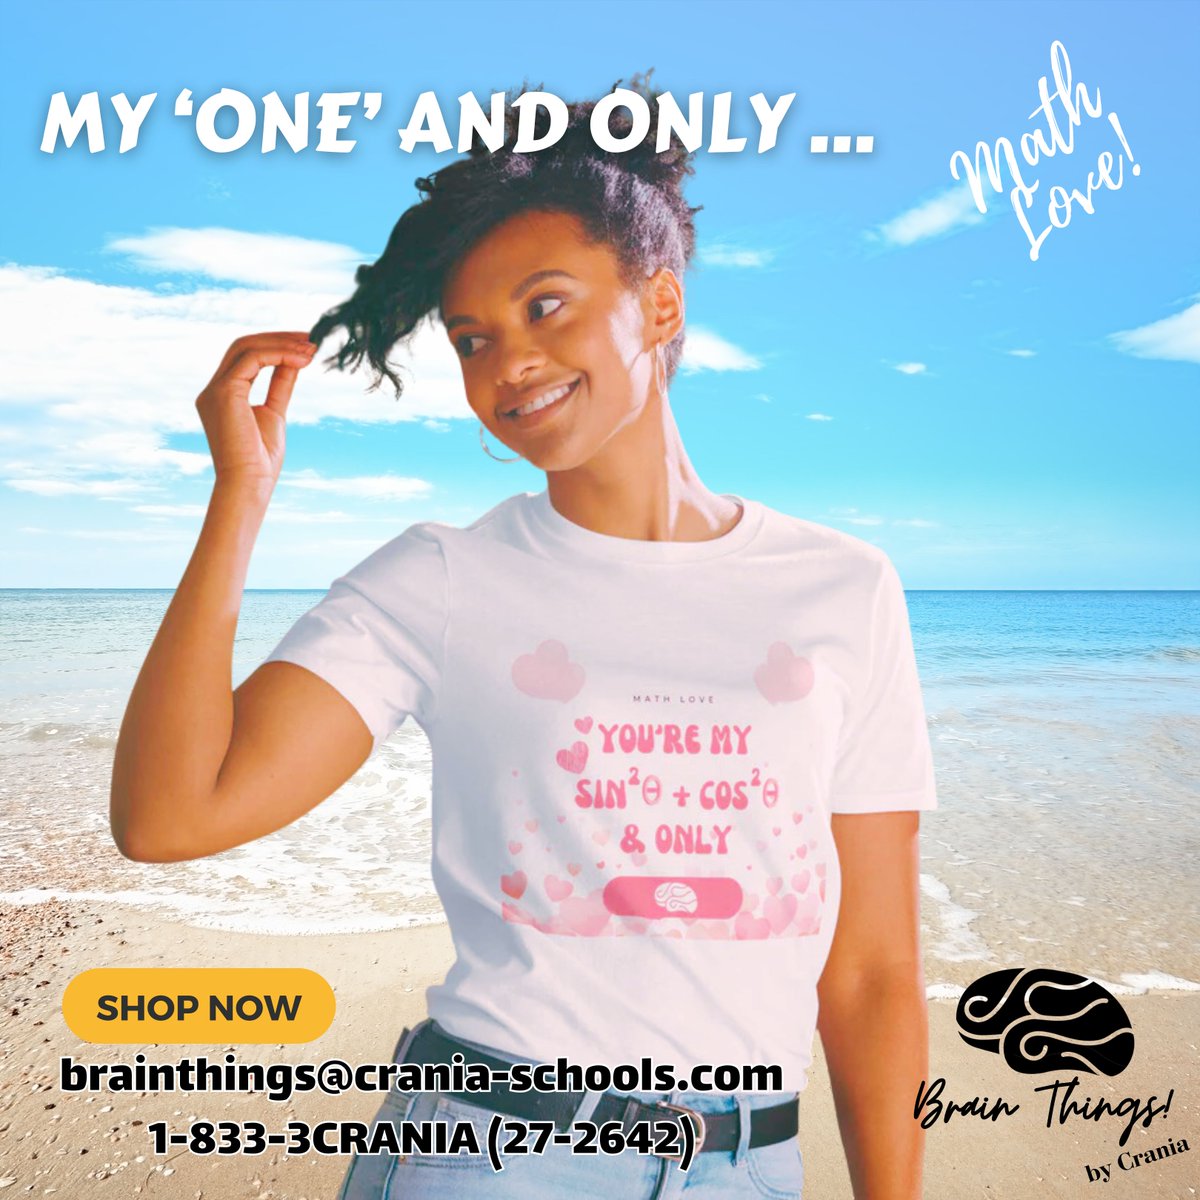 It's Day 7 and it's already the Best~! For my one and only, I'm getting you a shirt - the only one of its kind for my one of a kind!
brainthings.crania-schools.com/?utm_source=tw…
#12DaysofGifts #mathnerd #nerdygifts #festivegifts #mathgifts